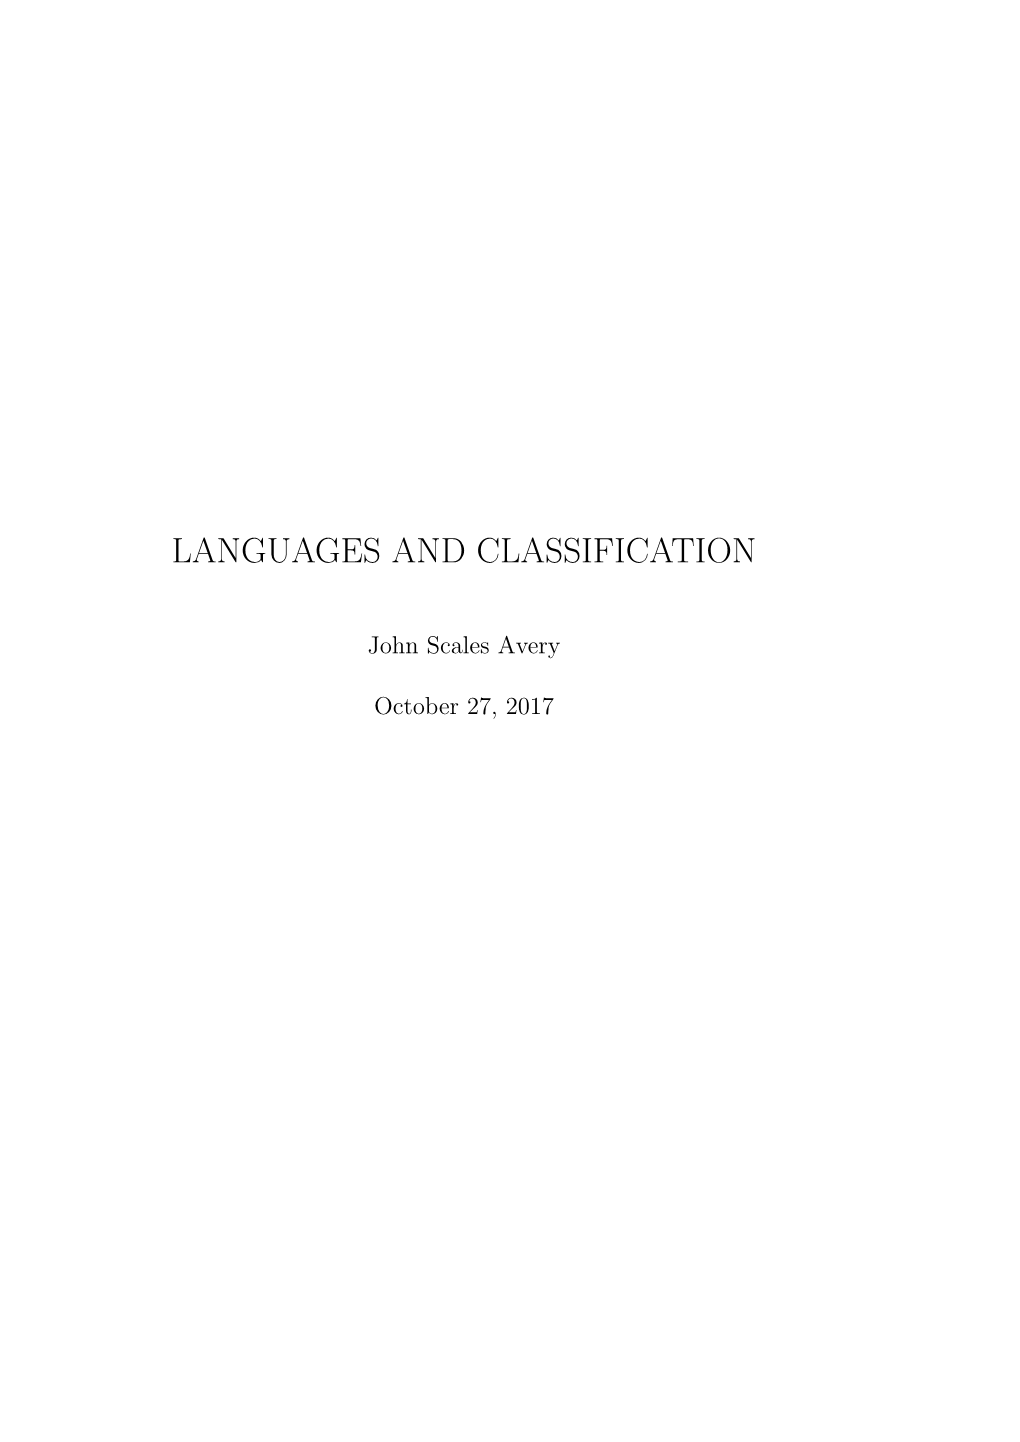 Languages and Classification